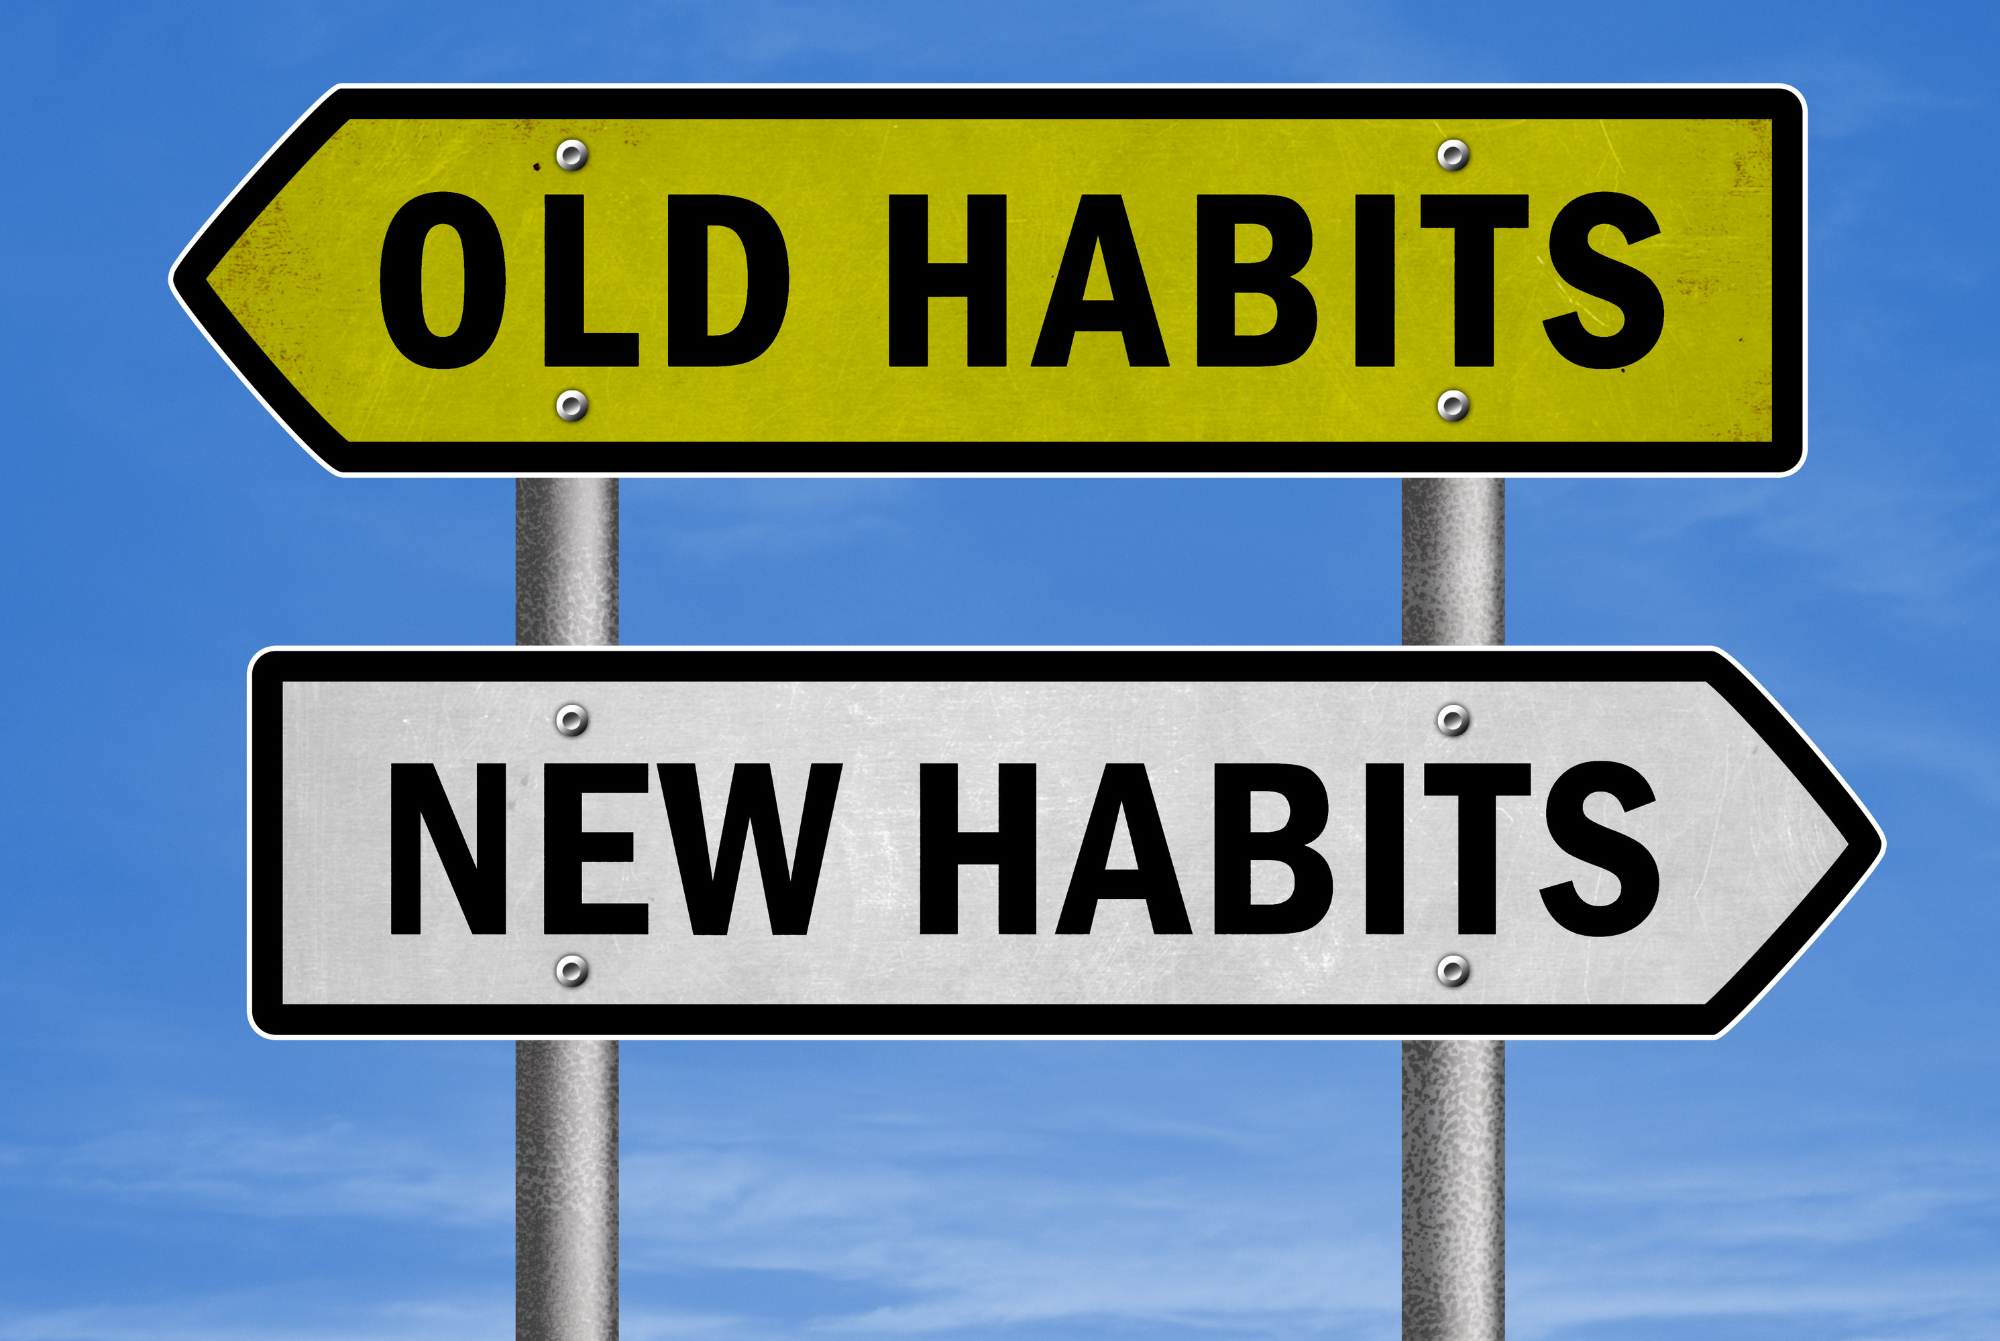 Two road signs point in opposite directions; one to "Old Habits" and the other to "New Habits."